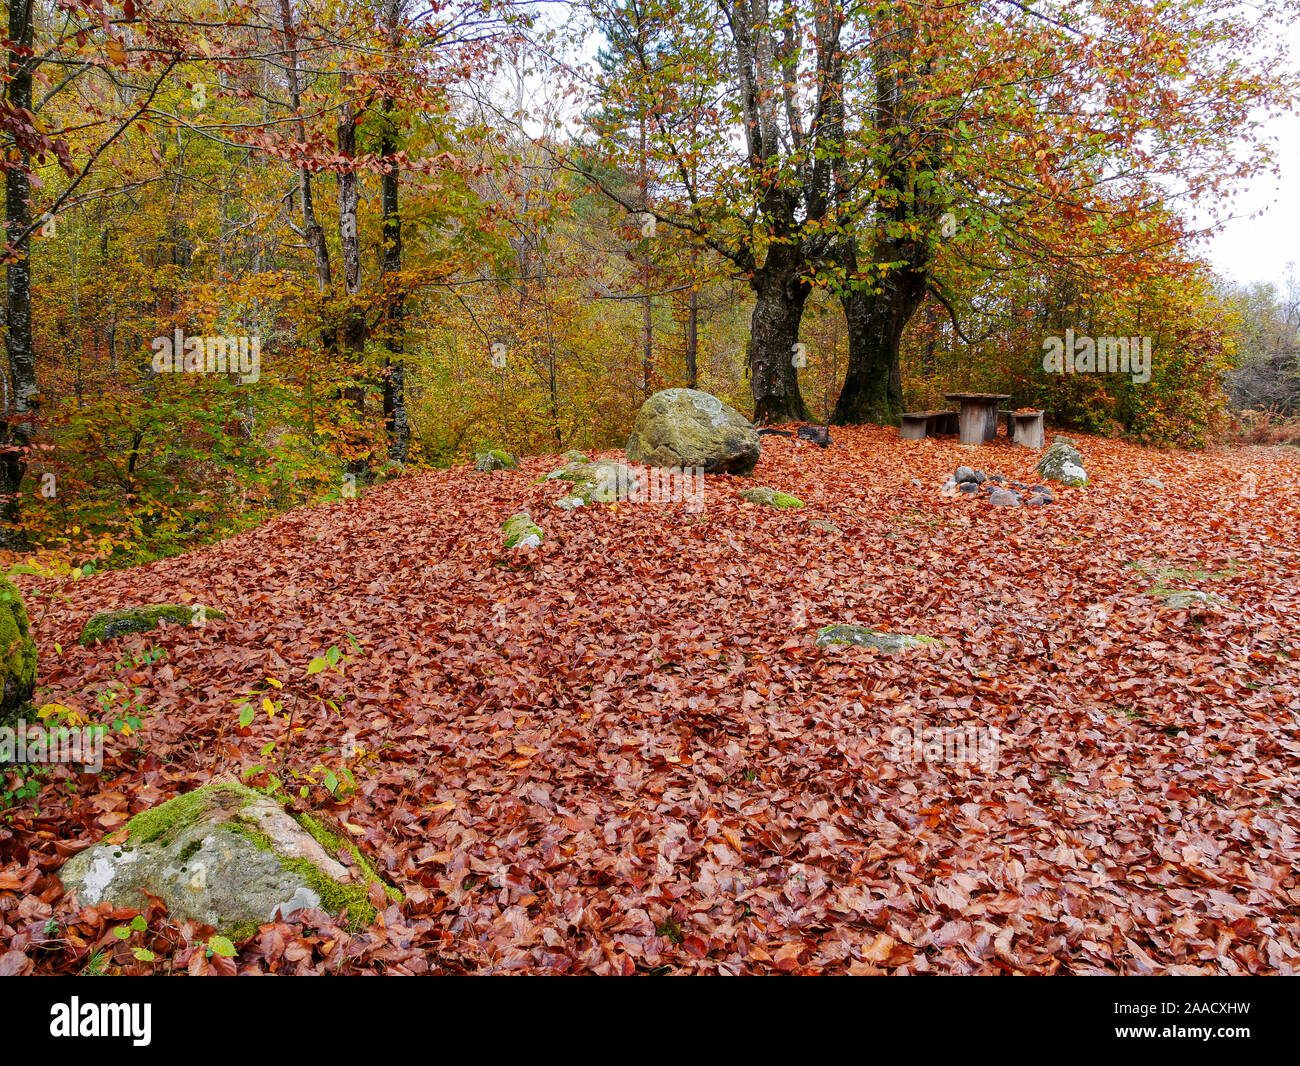 Picnic place in Stara Planina, Bulgaria. Autumn, November. Fallen leaves from centuries-old trees have covered the ground. Wooden primitive table and Stock Photo